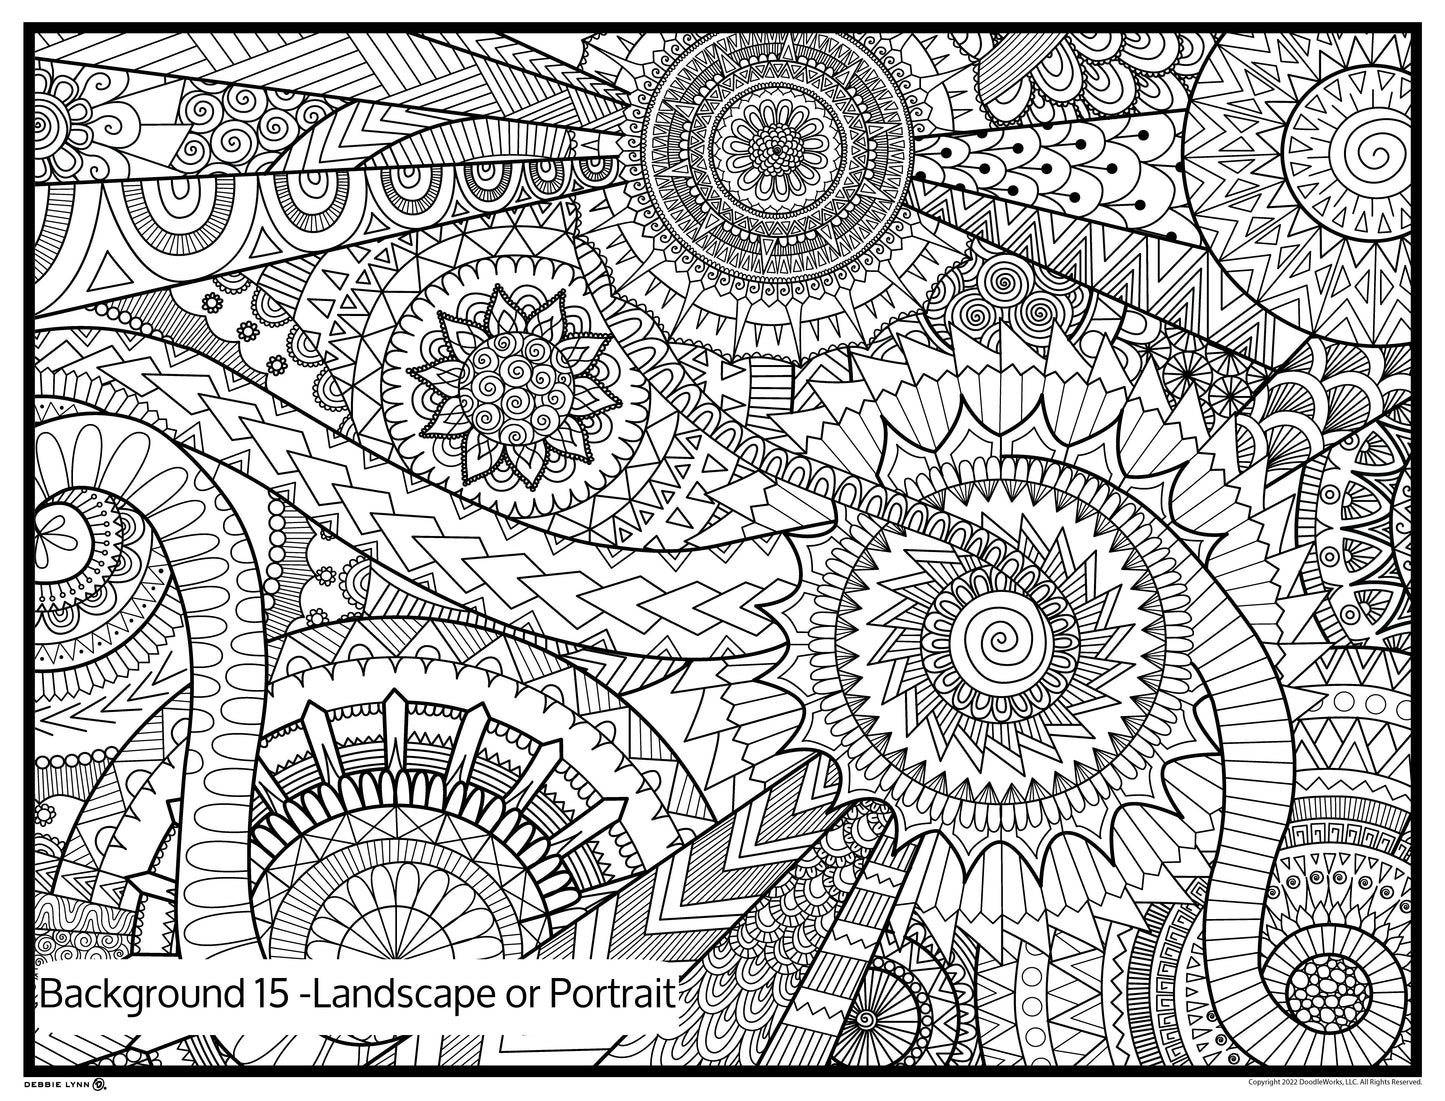 Background 15 Custom Personalized Giant Coloring Poster 46"x60"